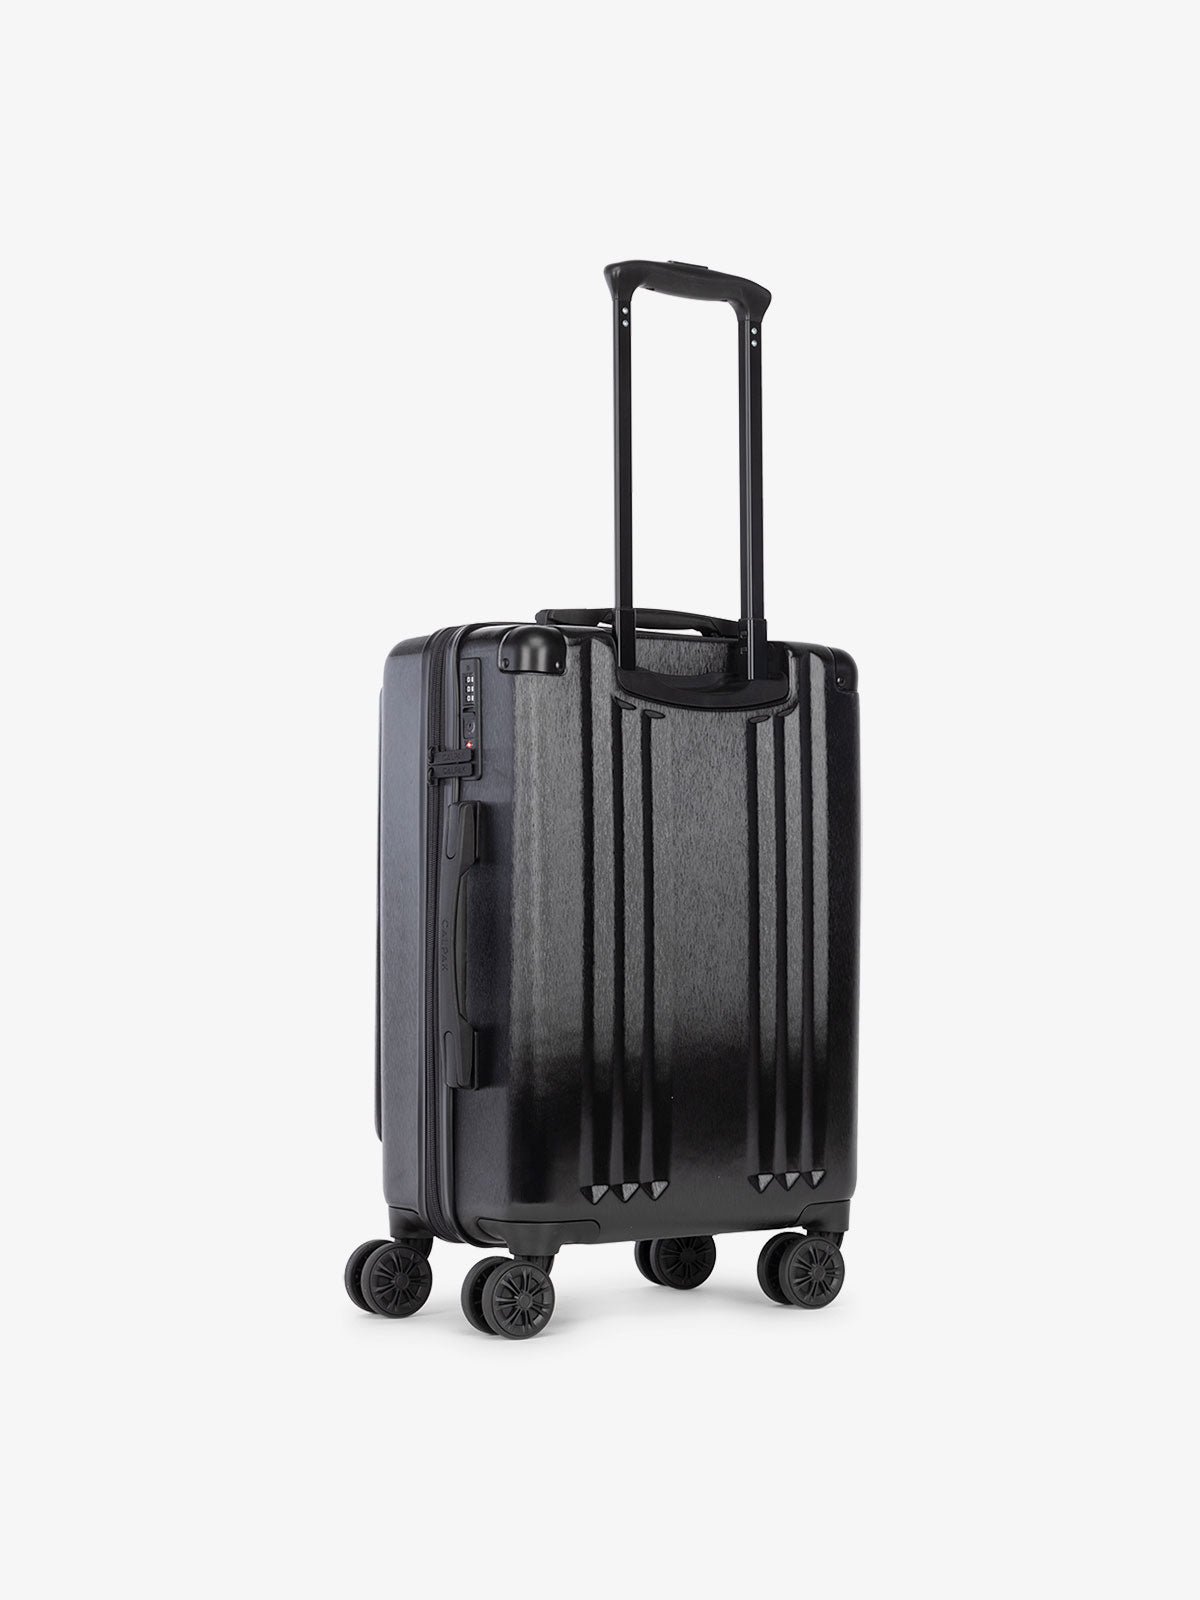 CALPAK Ambeur lightweight carry-on luggage with laptop front pocket, TSA lock and 360 spinner wheels in black